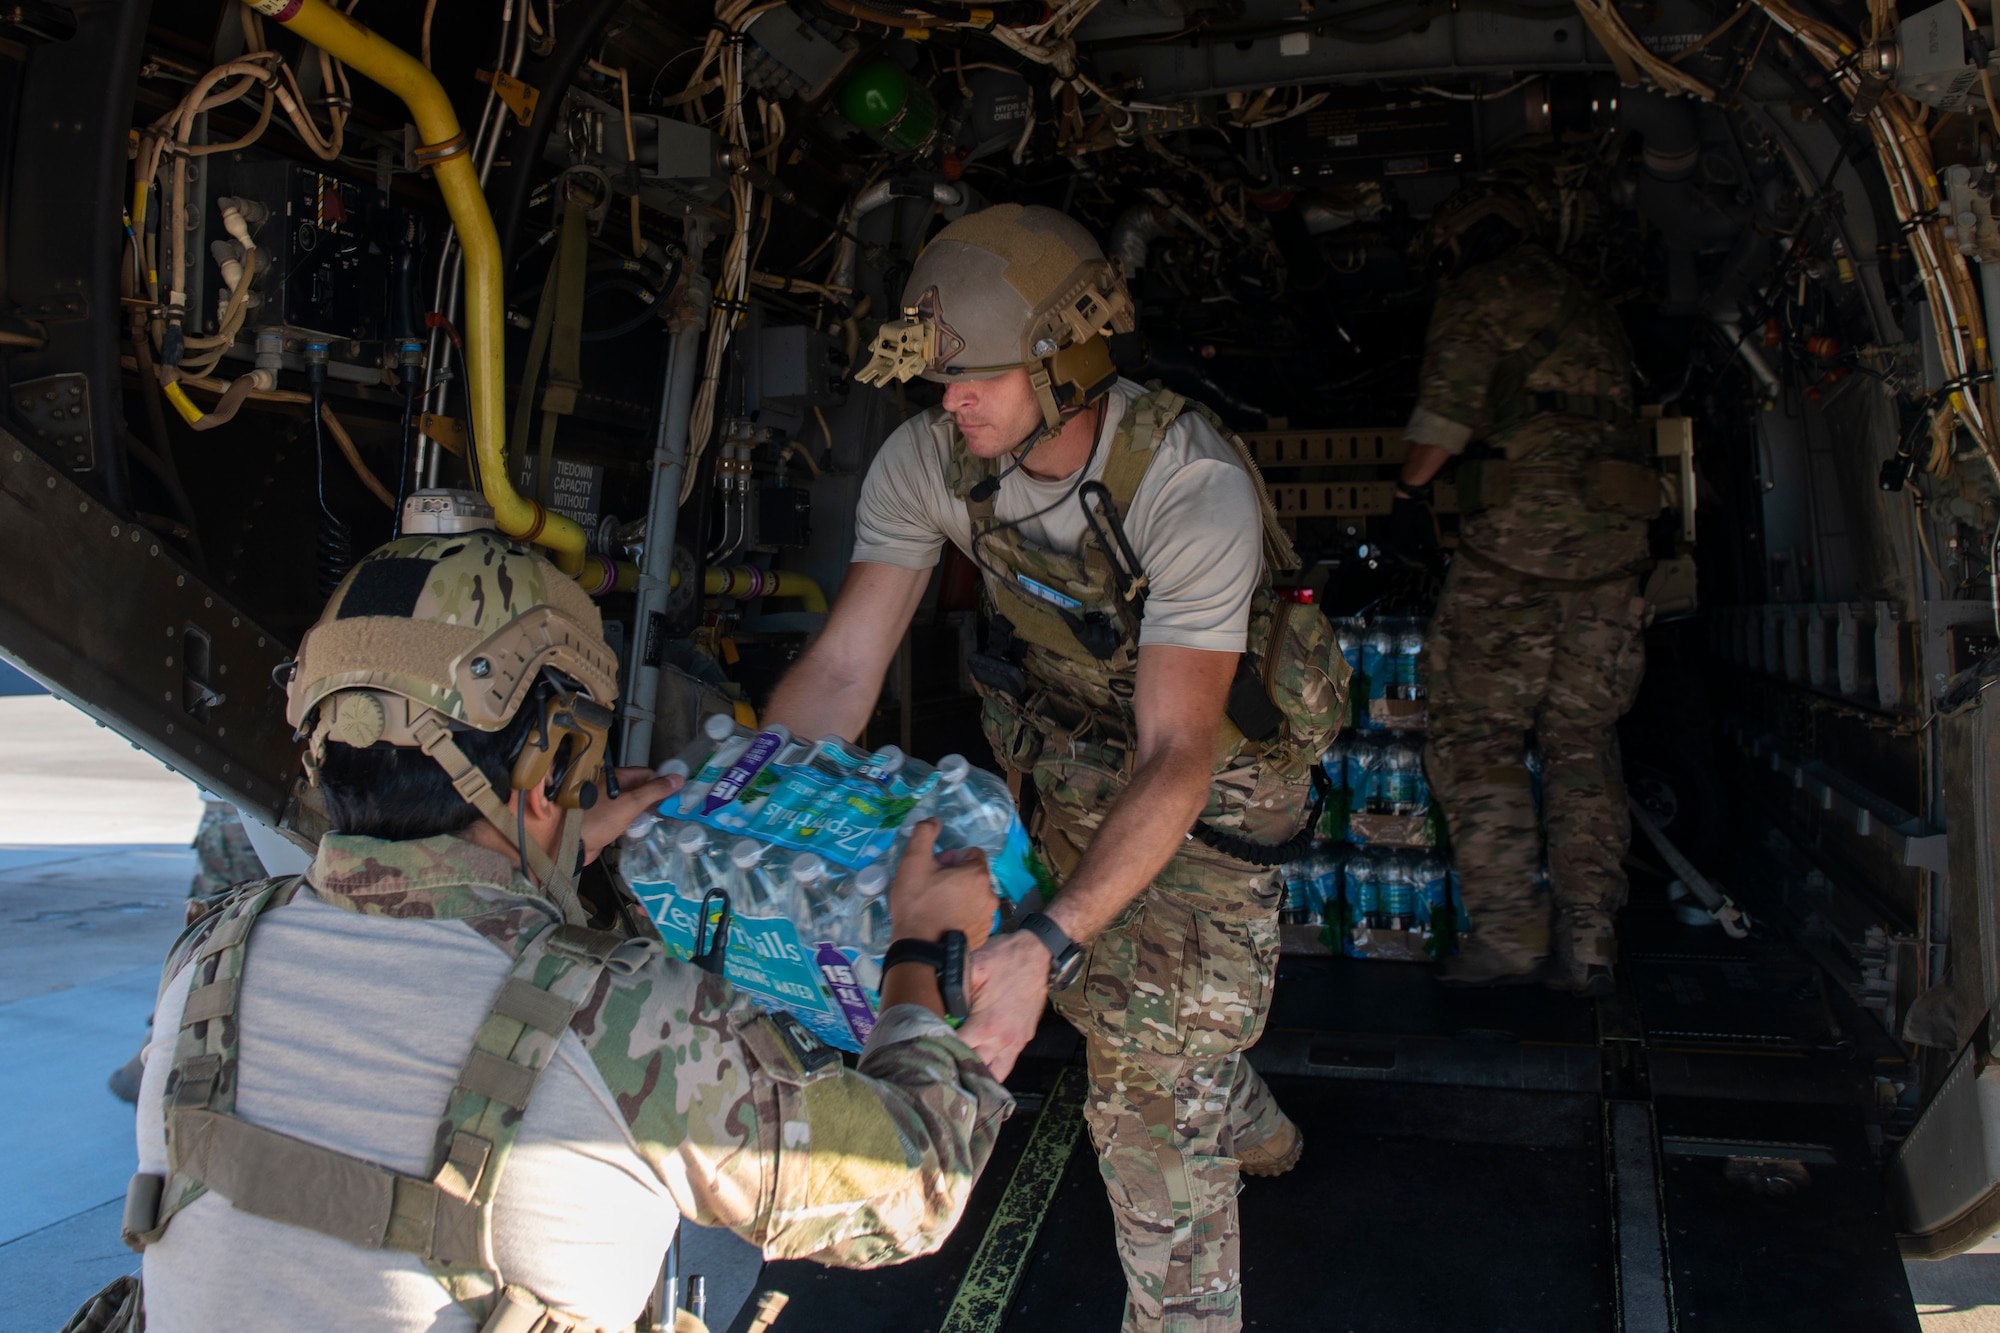 U.S. Air Force Special Tactics Airmen with the 23rd Special Tactics Squadron load water onto a CV-22 Osprey tiltrotor aircraft assigned to the 8th Special Operations Squadron at Hurlburt Field, Florida, Oct. 11, 2018.